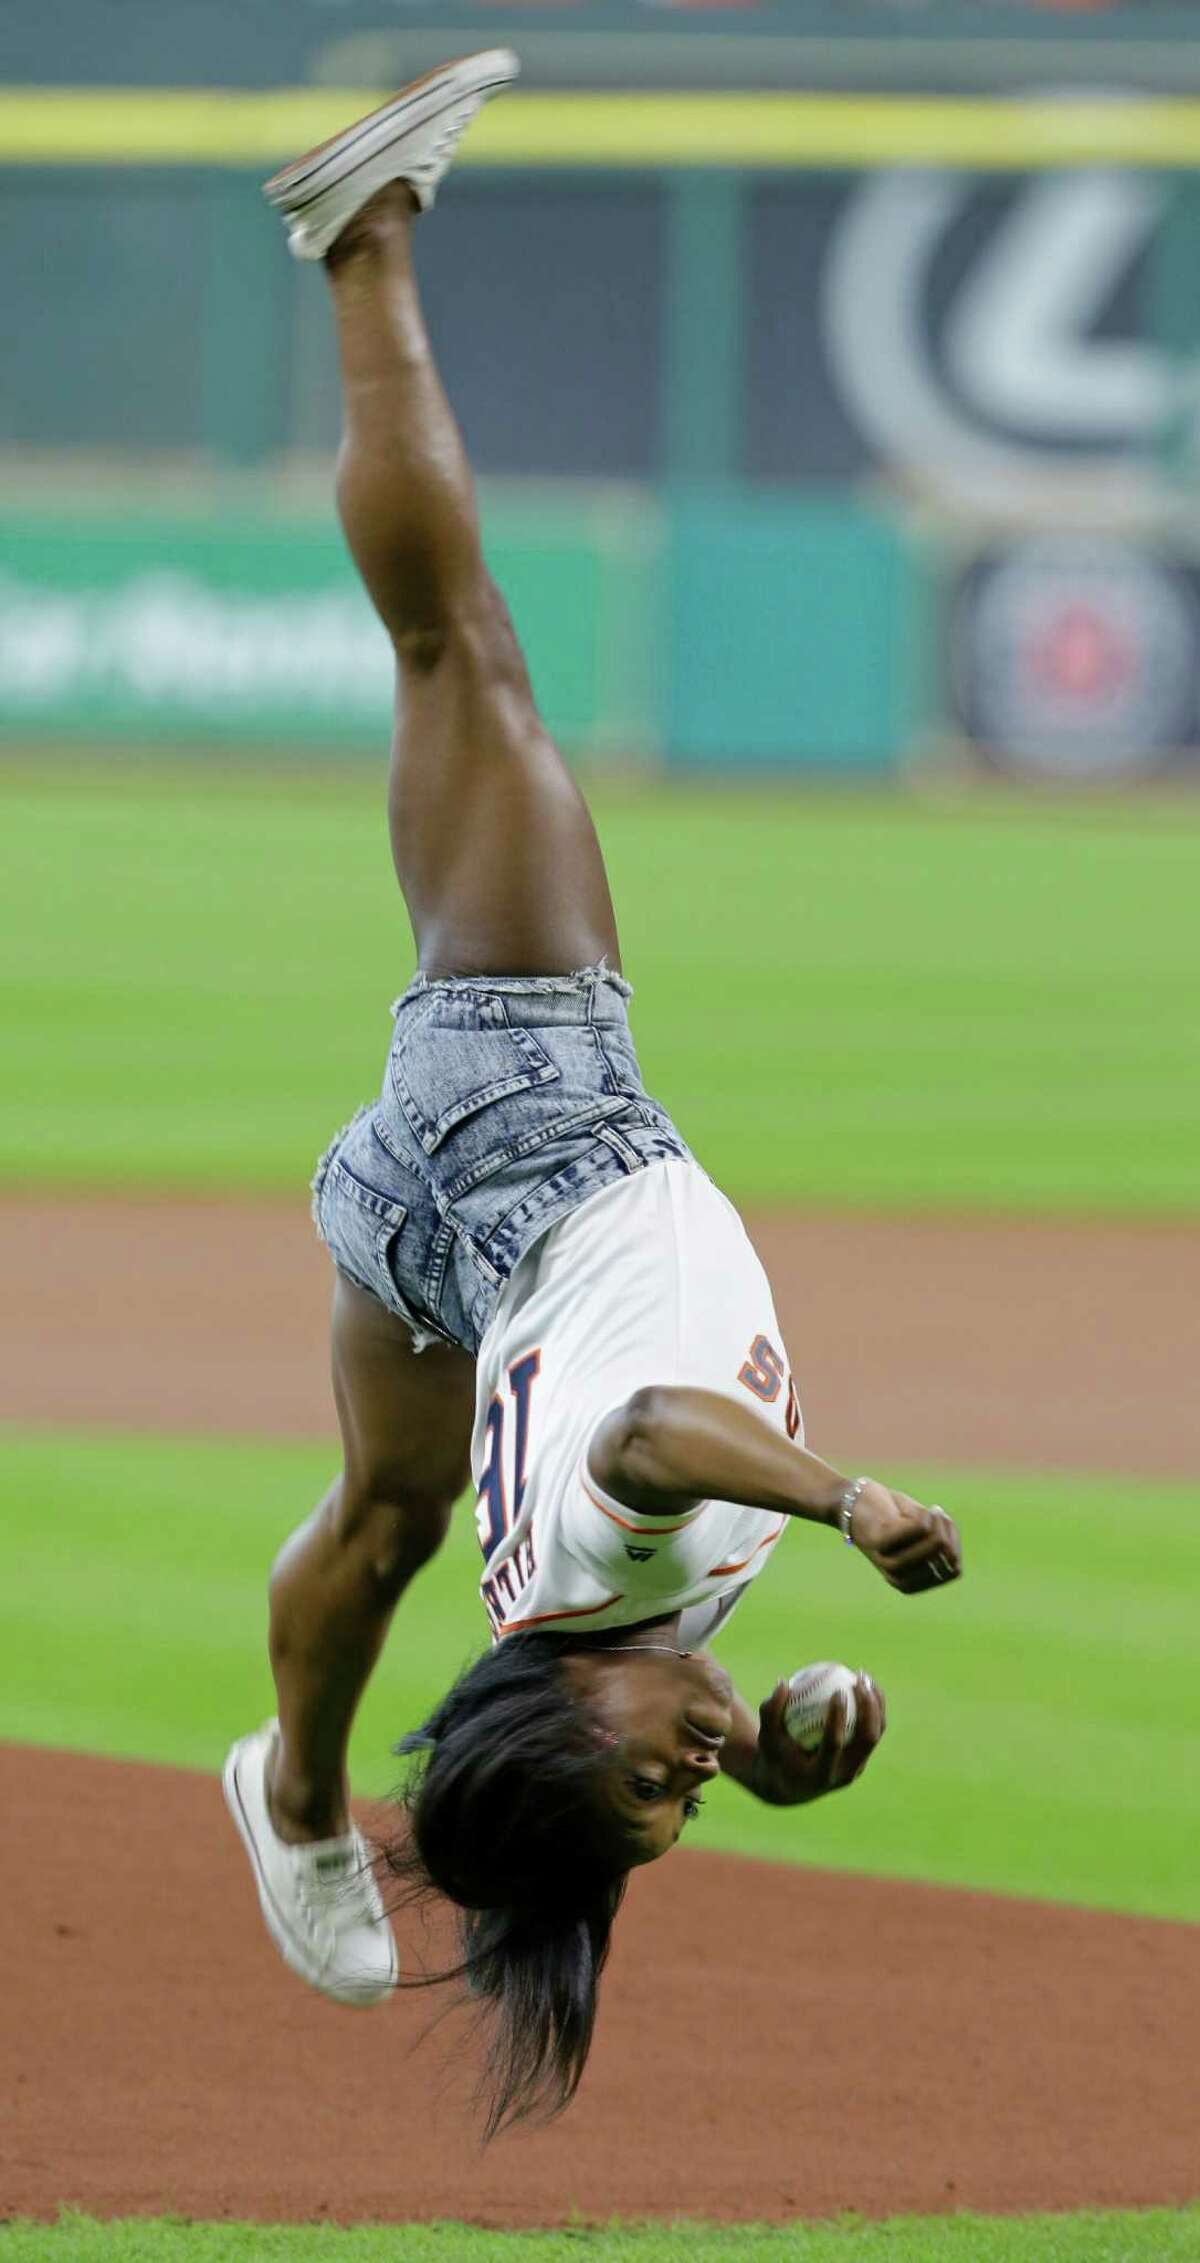 Simone Biles, of Spring, who will participate in the upcoming Olympic Games in Rio, performs a side aerial as she throws out a ceremonial first pitch before the Houston Astros and Seattle Mariners game at Minute Maid Park Monday, July 4, 2016, in Houston.